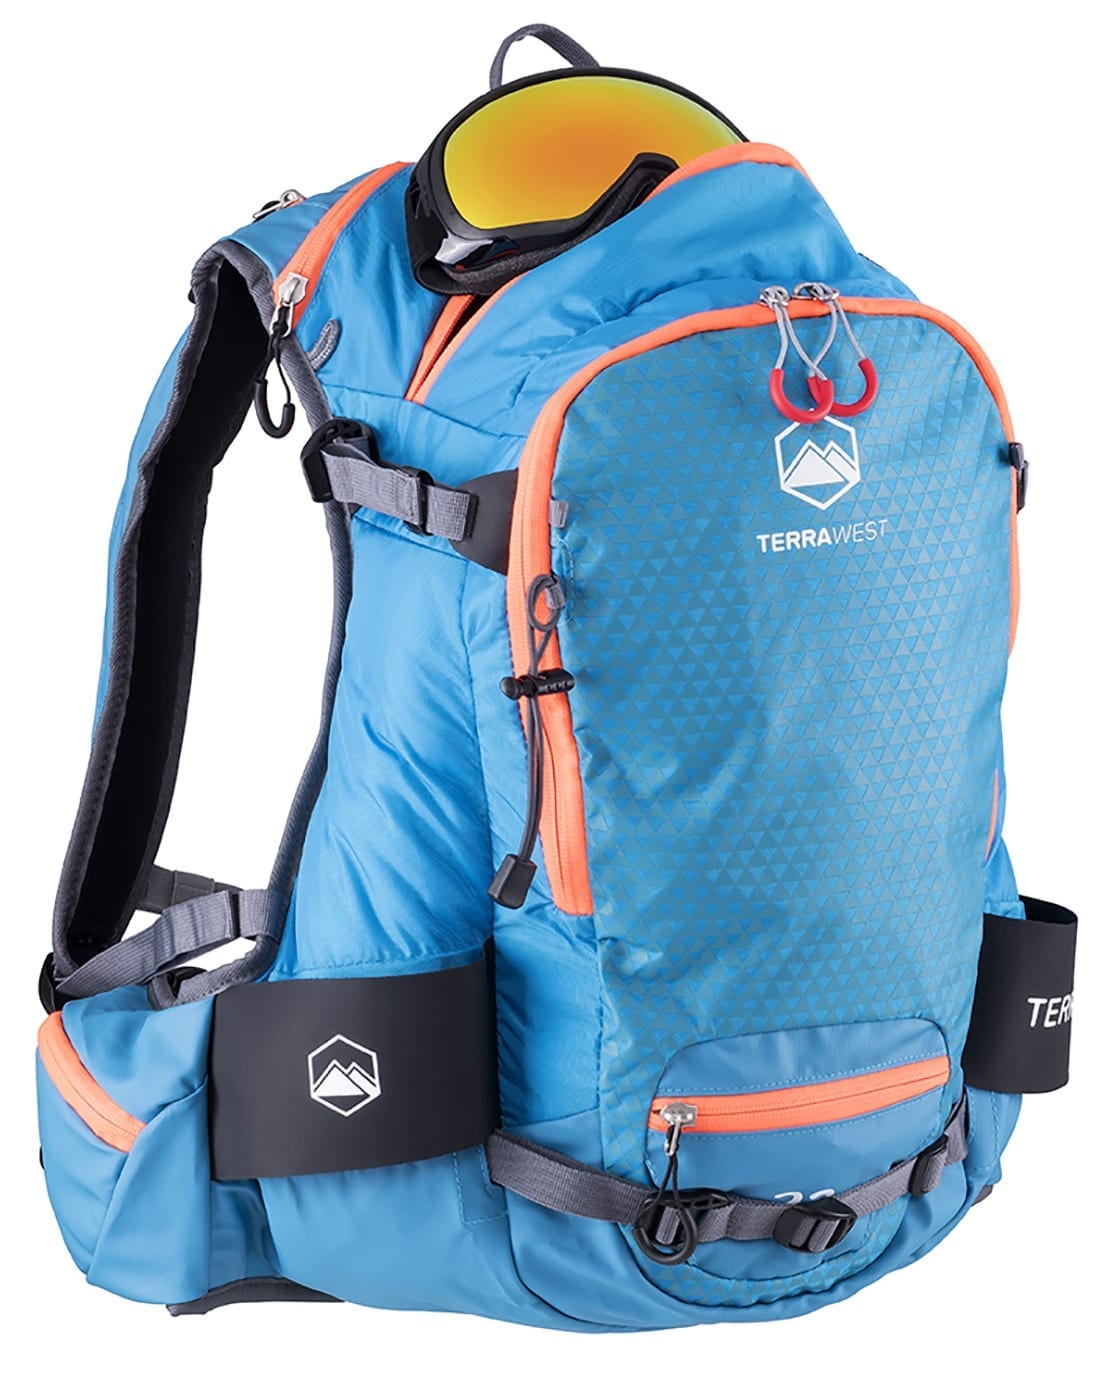 Terrawest Core 22 Litre Backpack (Recco Reflector Installed) - Fleece Lined Goggle Pocket